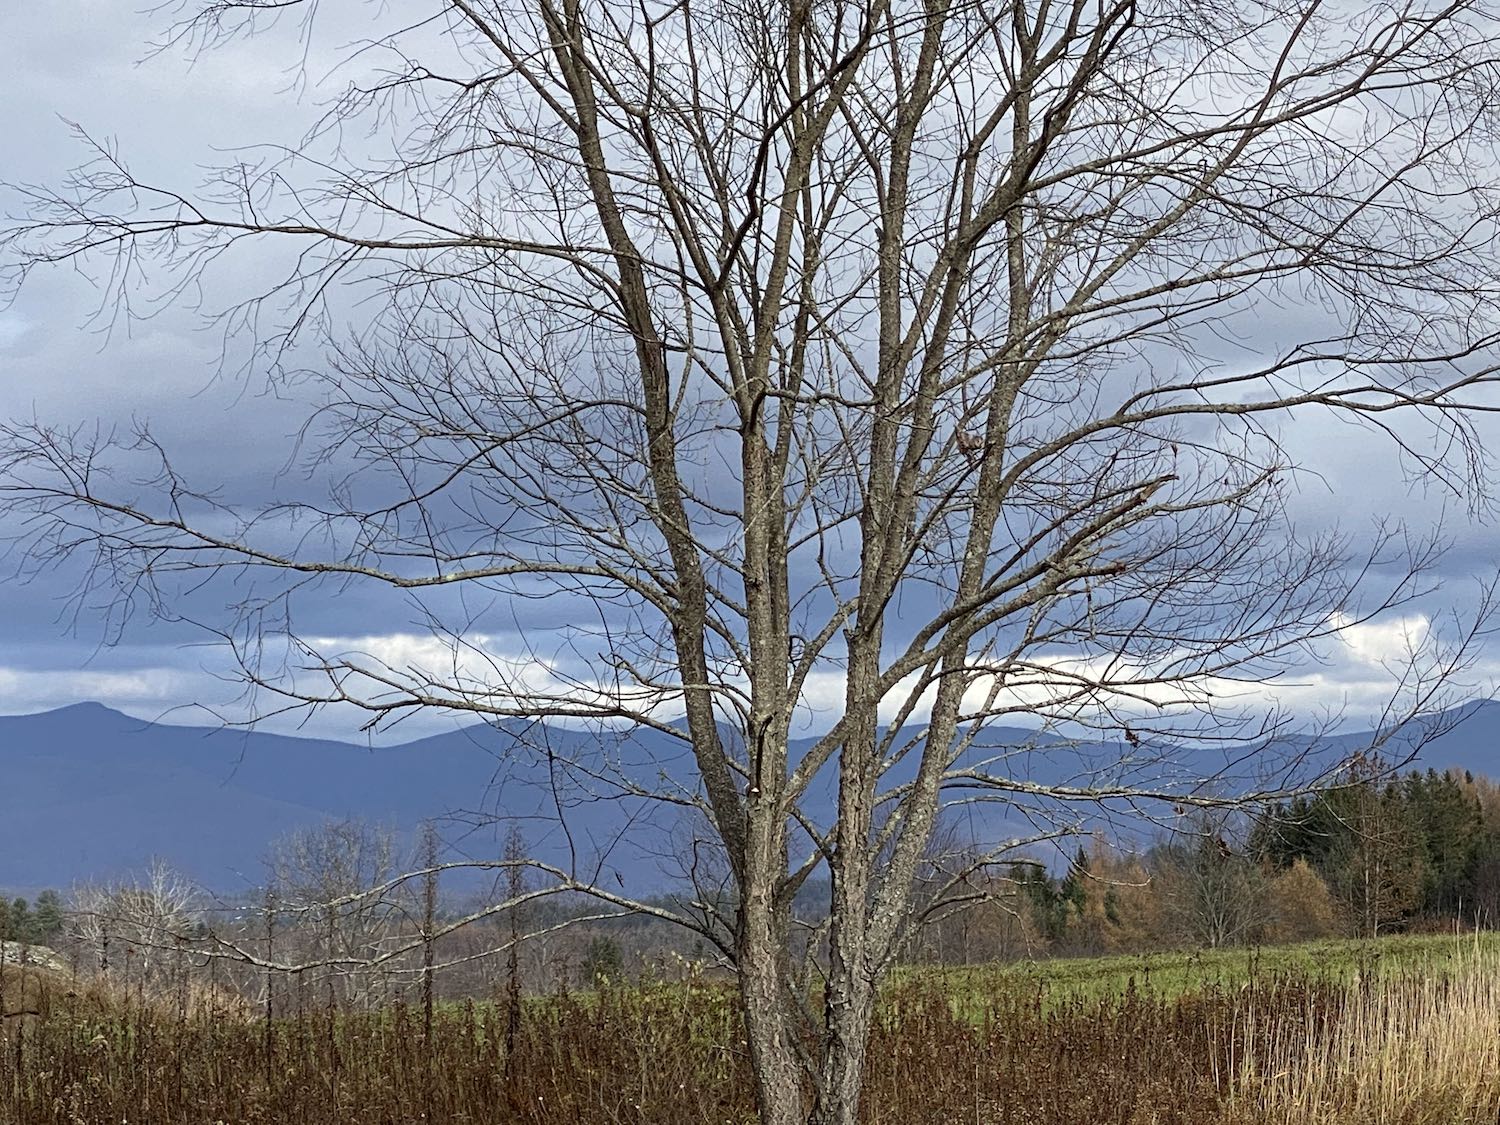 It's the weekend! Number 275, A Fall Tree and Mountains in Northern N.H.